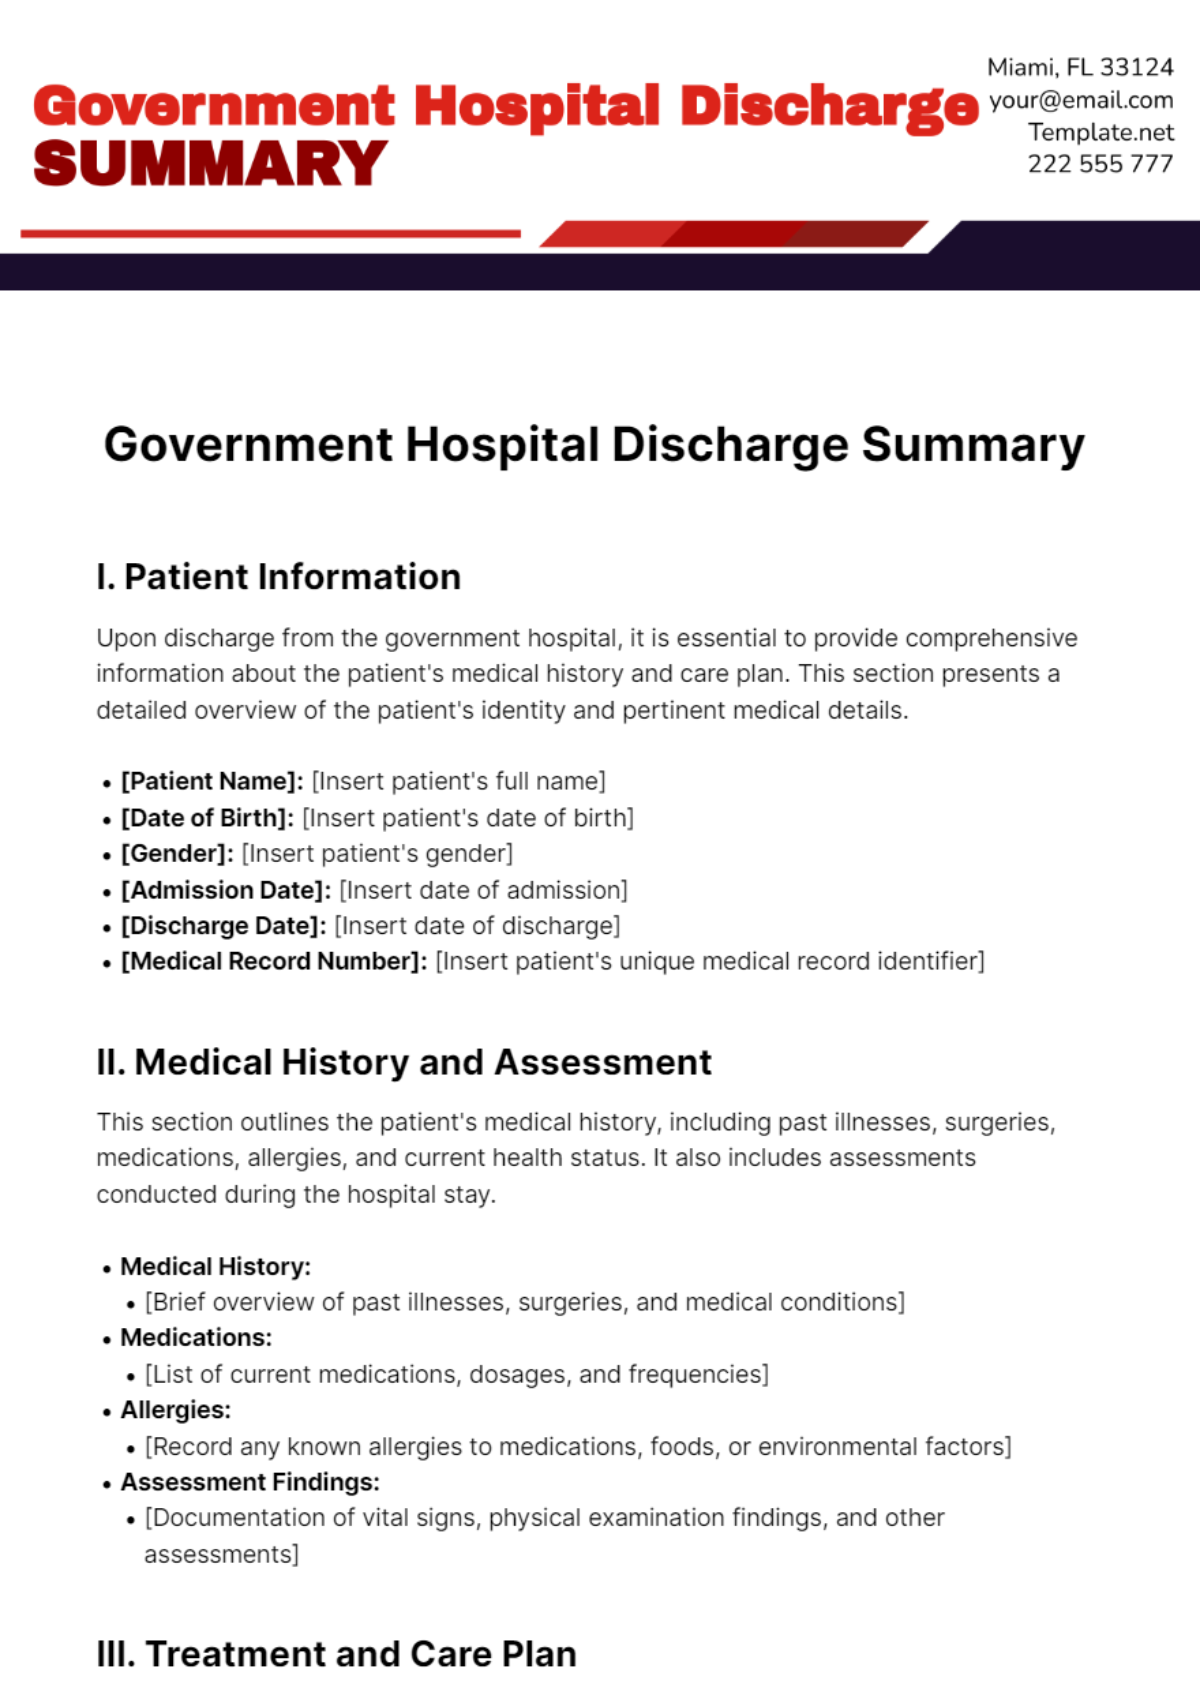 Government Hospital Discharge Summary Template